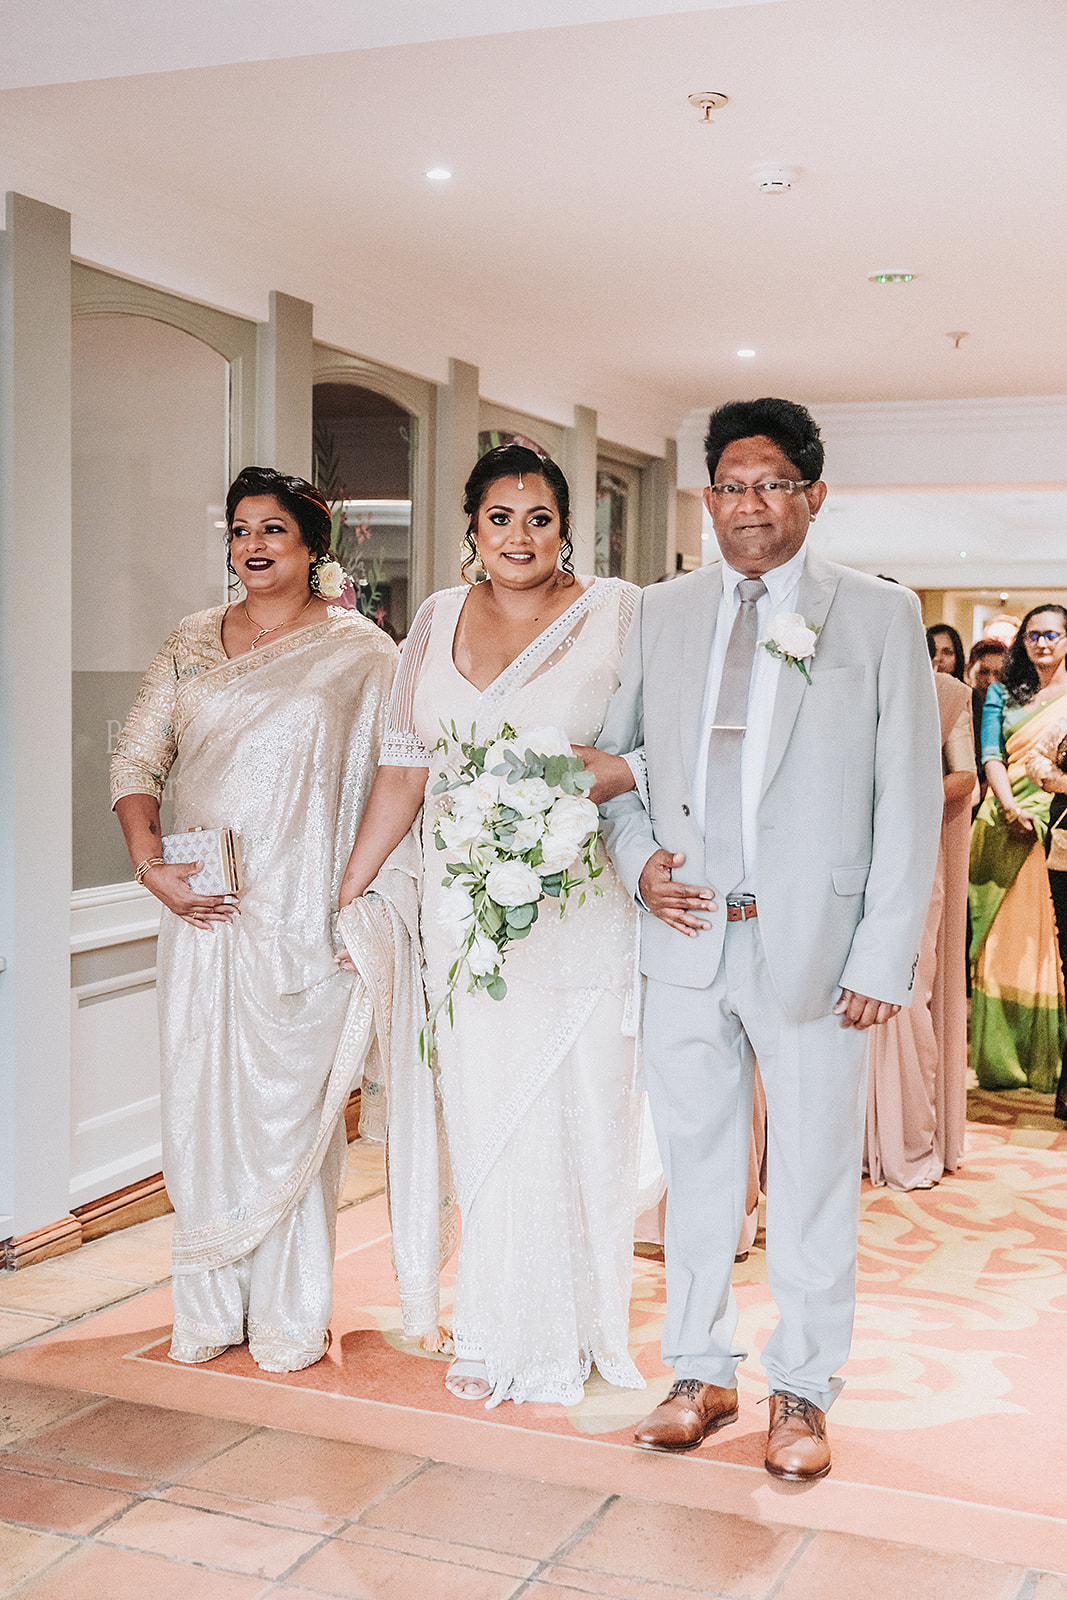 the bride and her parents arriving at the Sri Lankan wedding